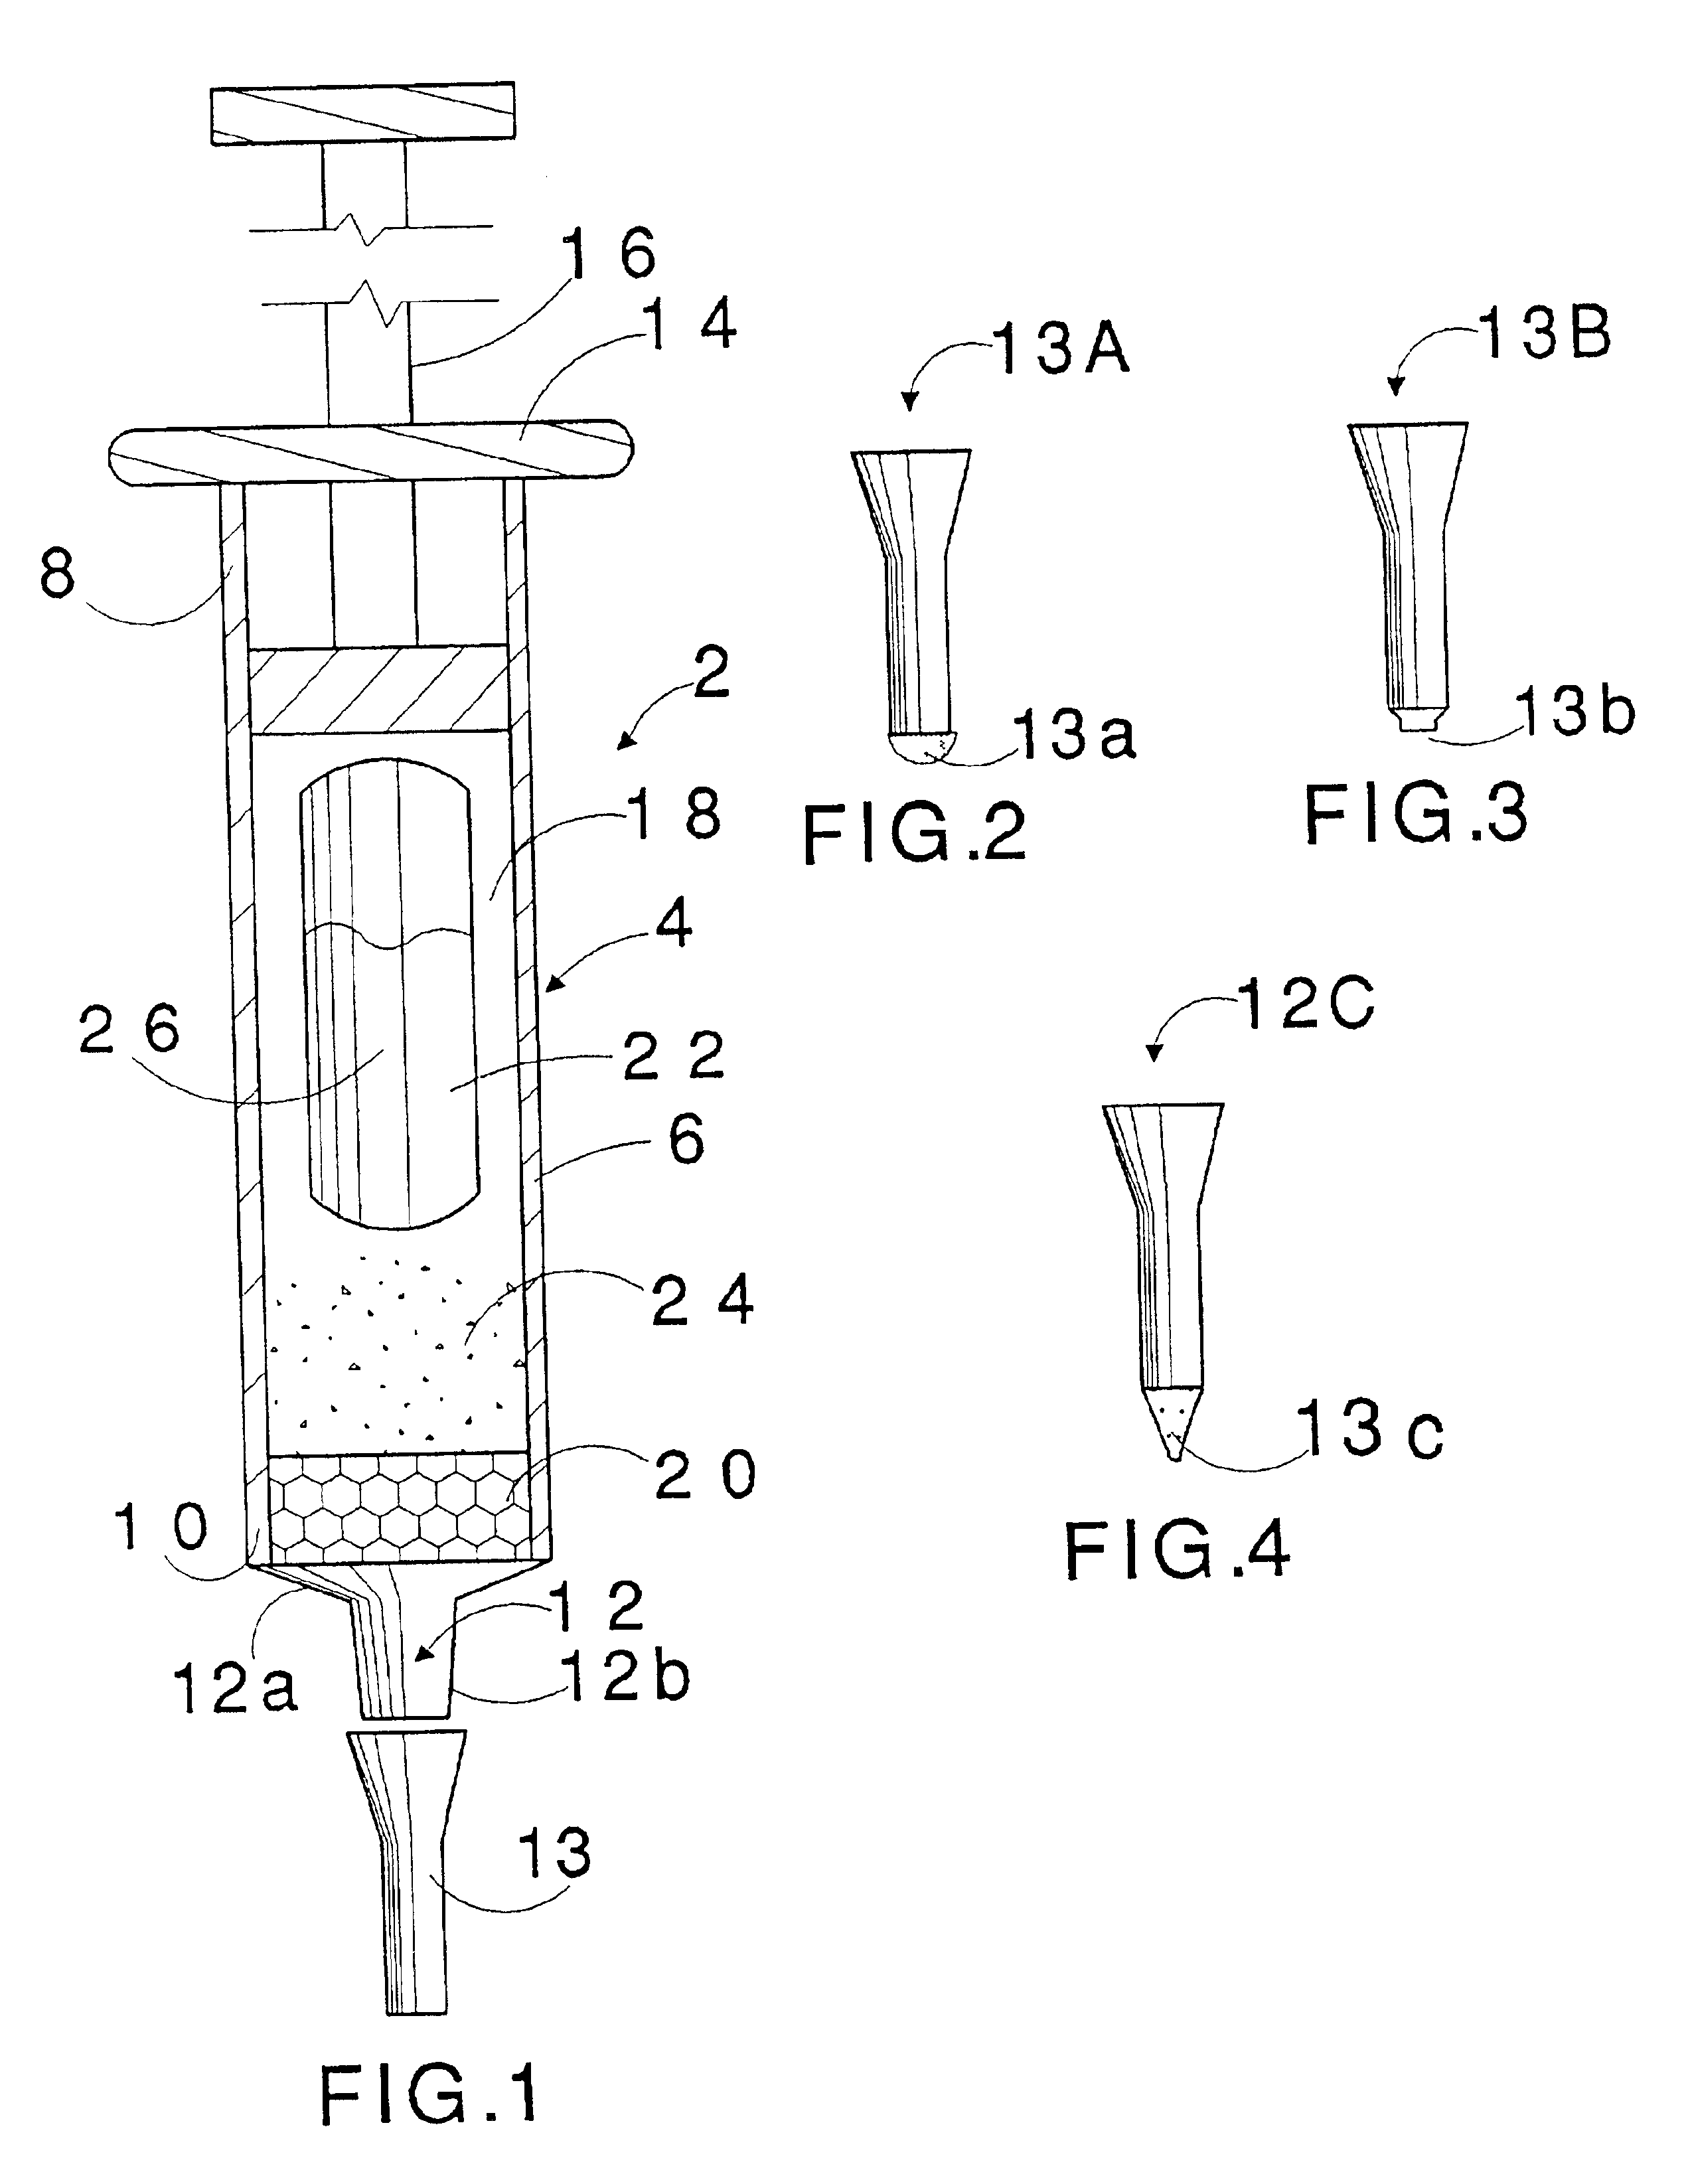 Method for curing cyanoacrylate adhesives